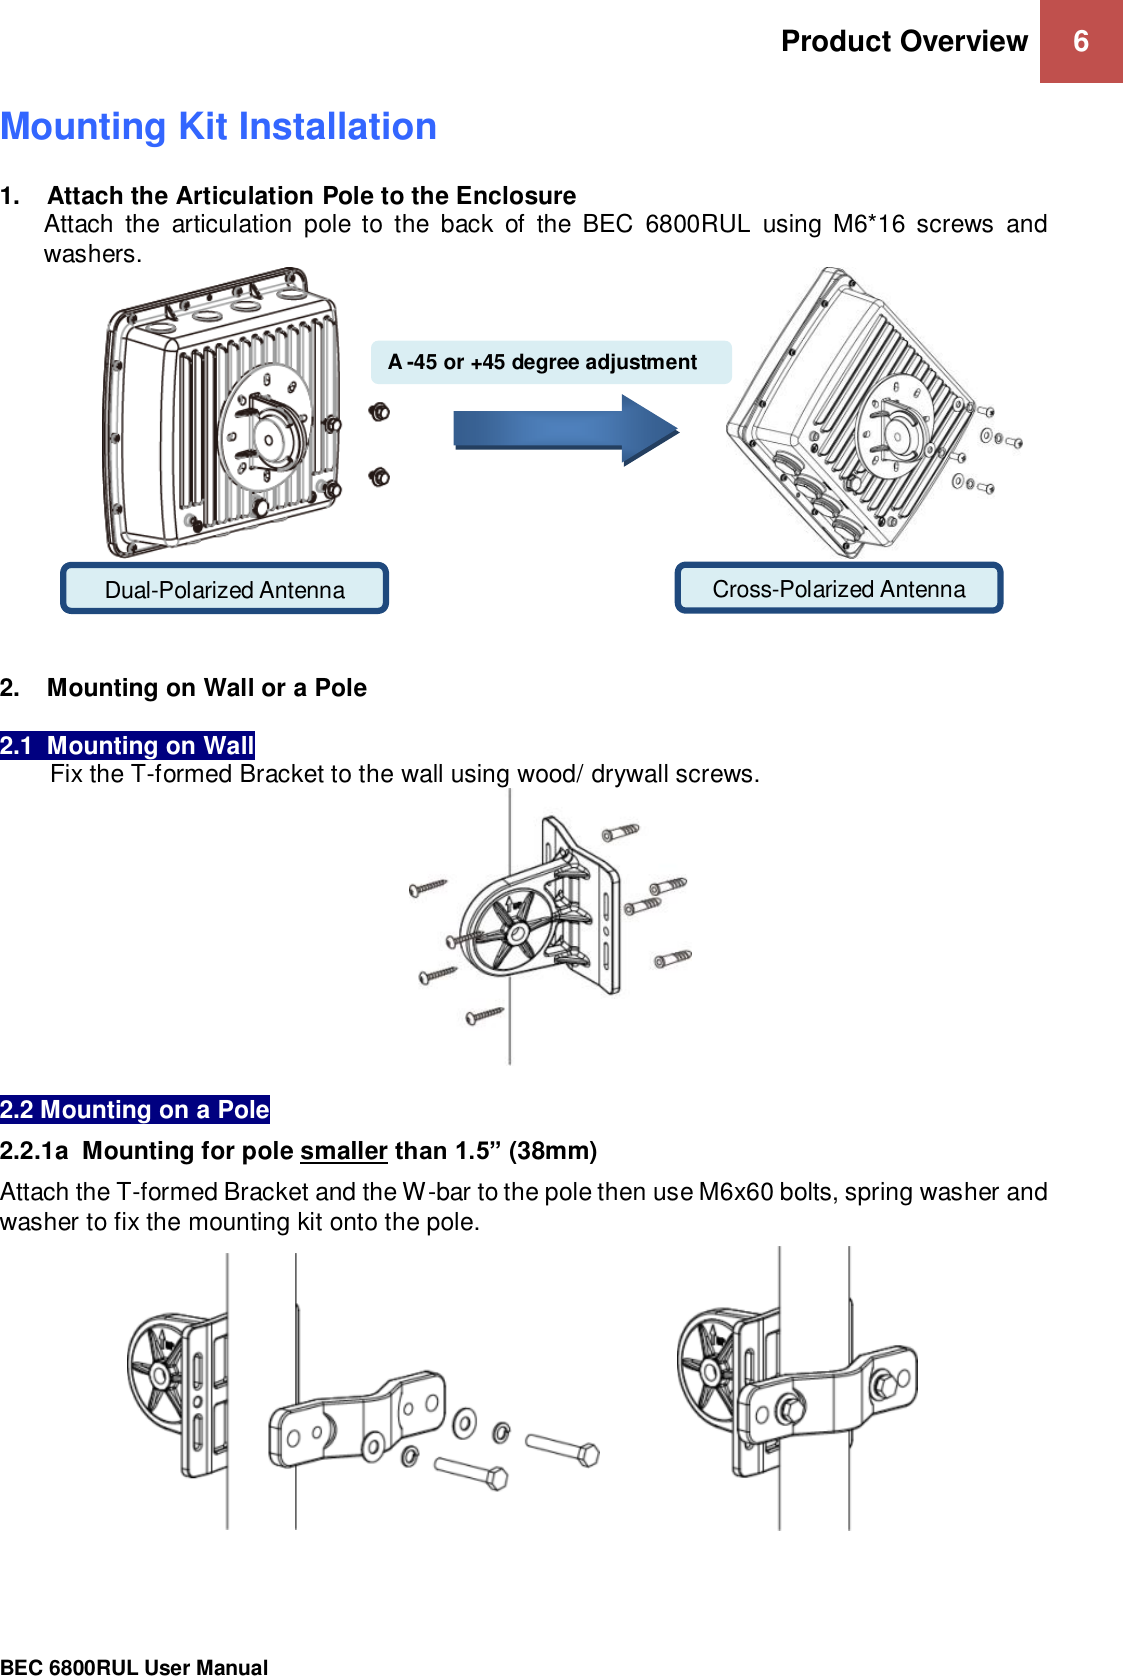 Product Overview 6                                                 BEC 6800RUL User Manual  Mounting Kit Installation 1.  Attach the Articulation Pole to the Enclosure Attach  the  articulation  pole  to  the  back  of  the  BEC  6800RUL  using  M6*16  screws  and washers.                                                       2.  Mounting on Wall or a Pole  2.1  Mounting on Wall Fix the T-formed Bracket to the wall using wood/ drywall screws.   2.2 Mounting on a Pole 2.2.1a  Mounting for pole smaller than 1.5” (38mm) Attach the T-formed Bracket and the W-bar to the pole then use M6x60 bolts, spring washer and washer to fix the mounting kit onto the pole.                  Dual-Polarized Antenna Cross-Polarized Antenna  A -45 or +45 degree adjustment  